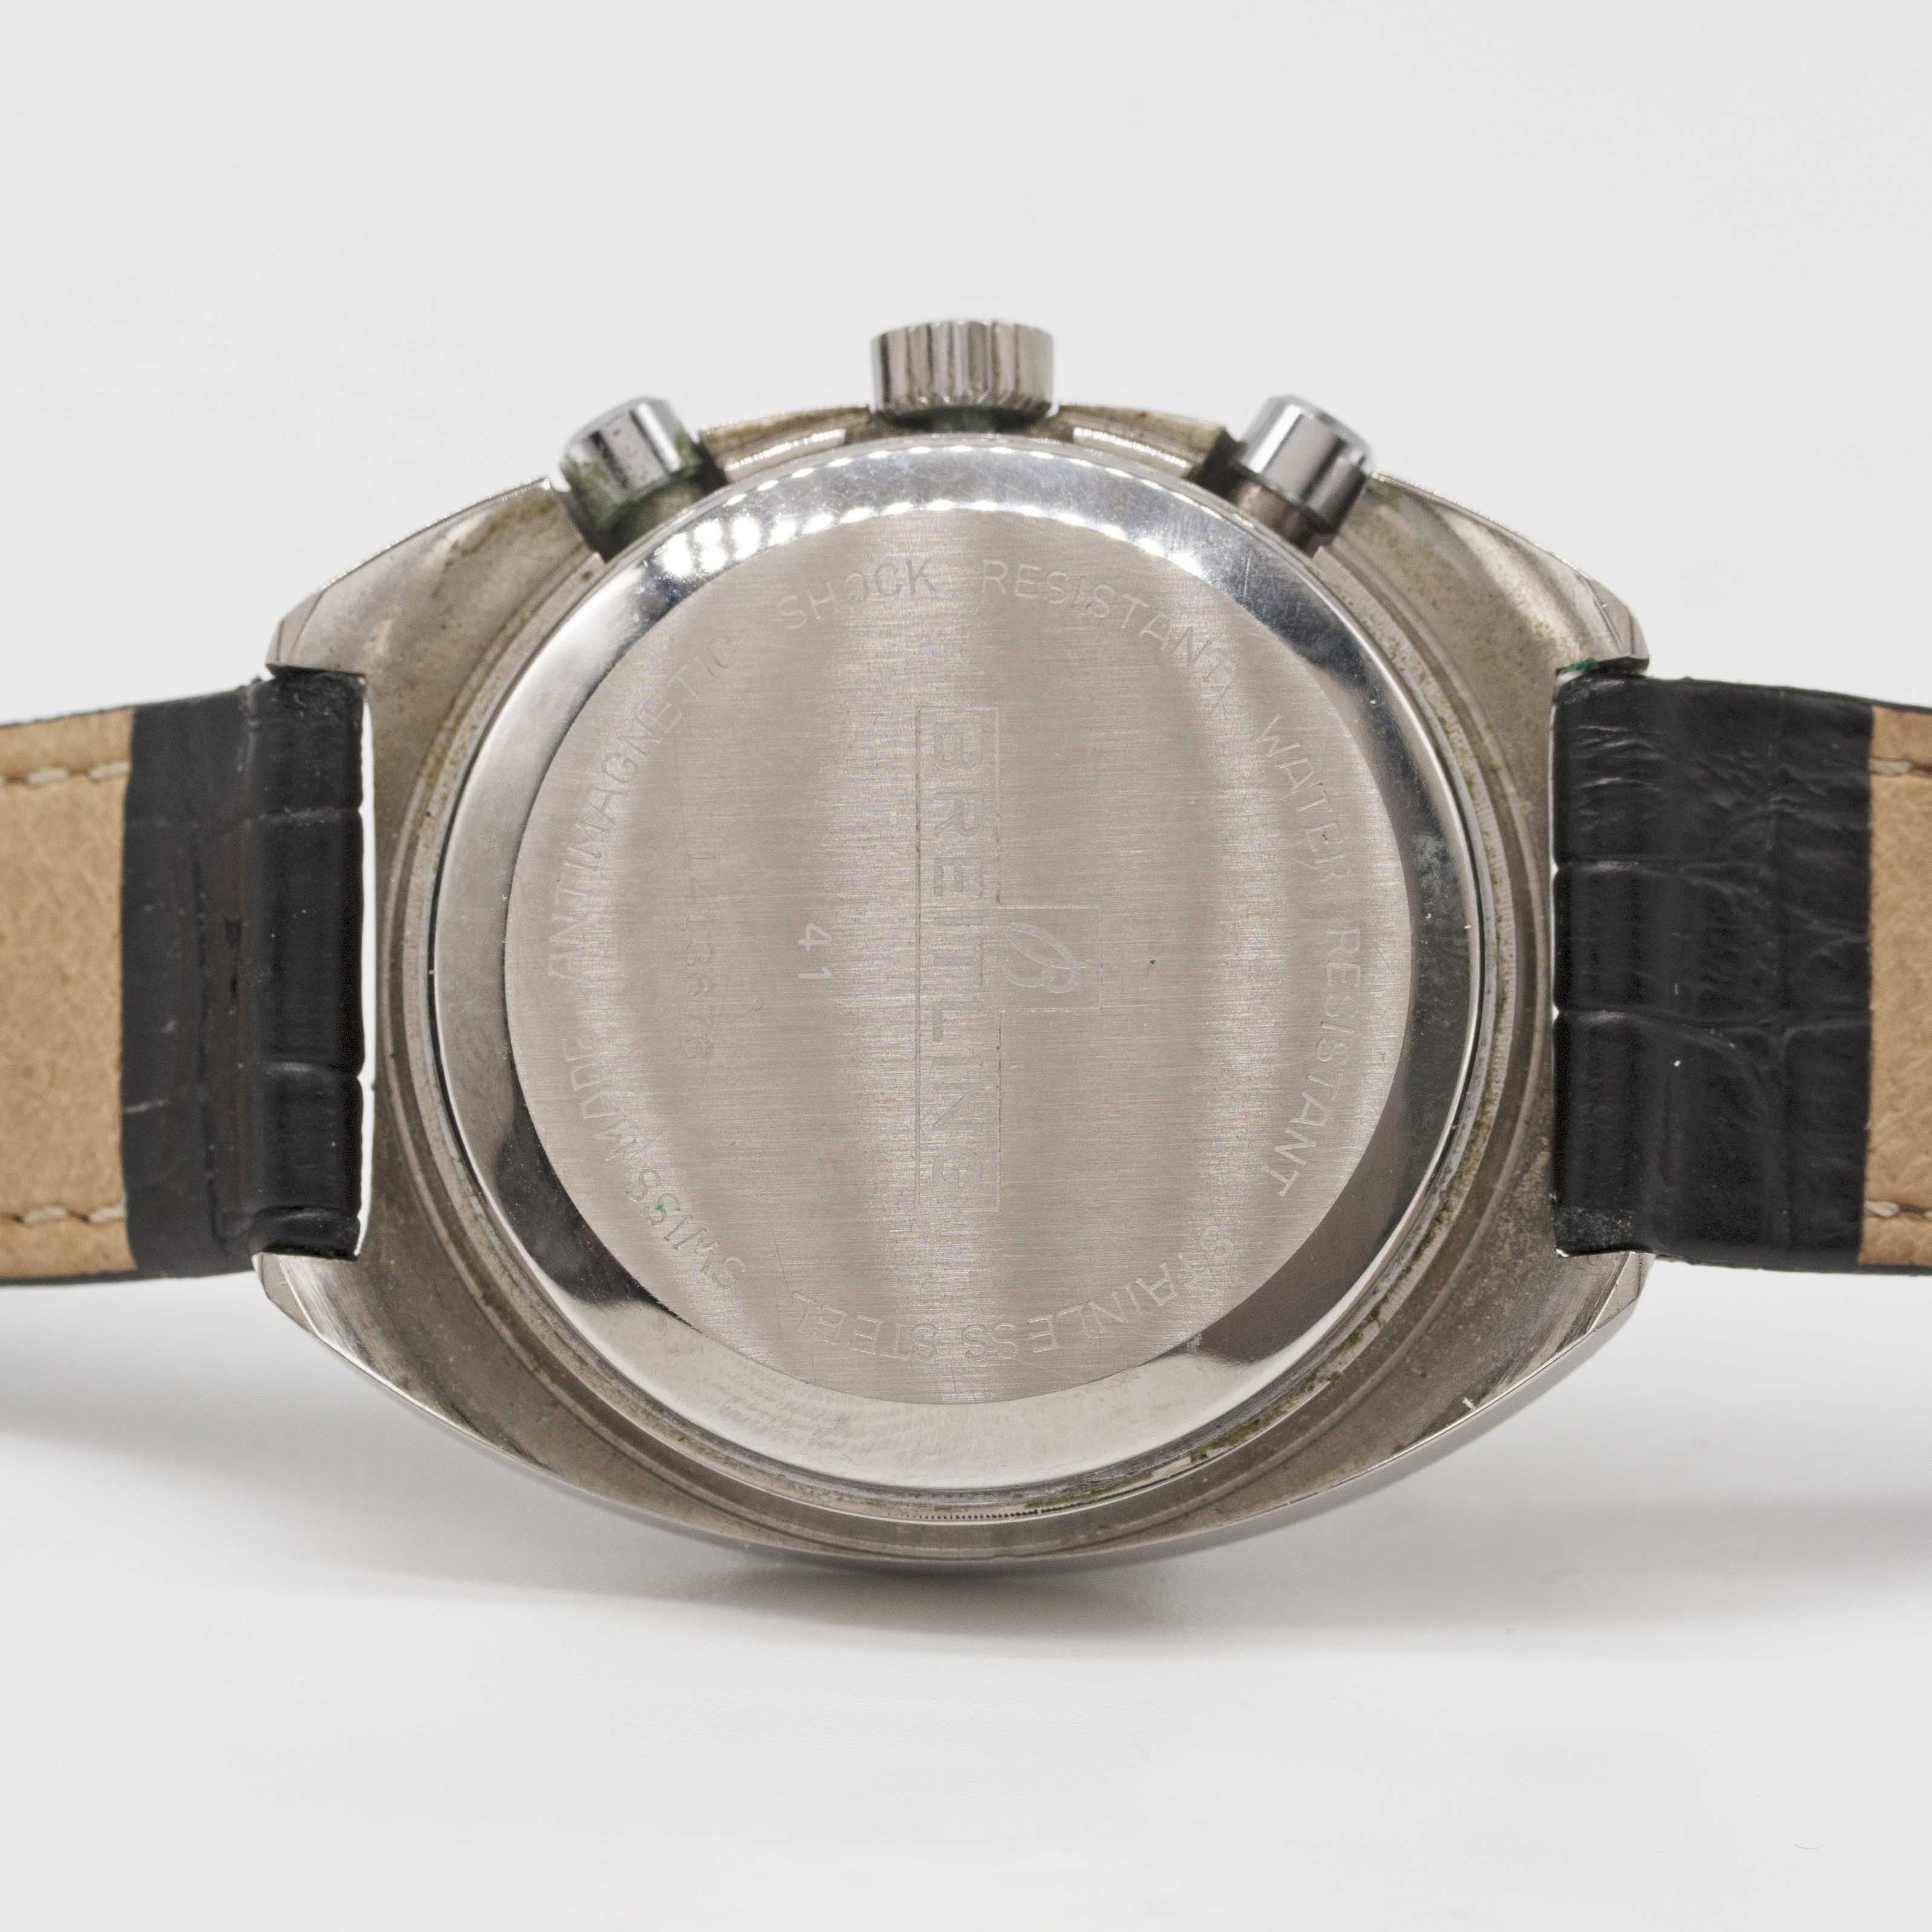 A GENTLEMAN'S STAINLESS STEEL BREITLING GENEVE "LONG PLAYING" CHRONOGRAPH WRIST WATCH CIRCA 1973, - Image 5 of 6